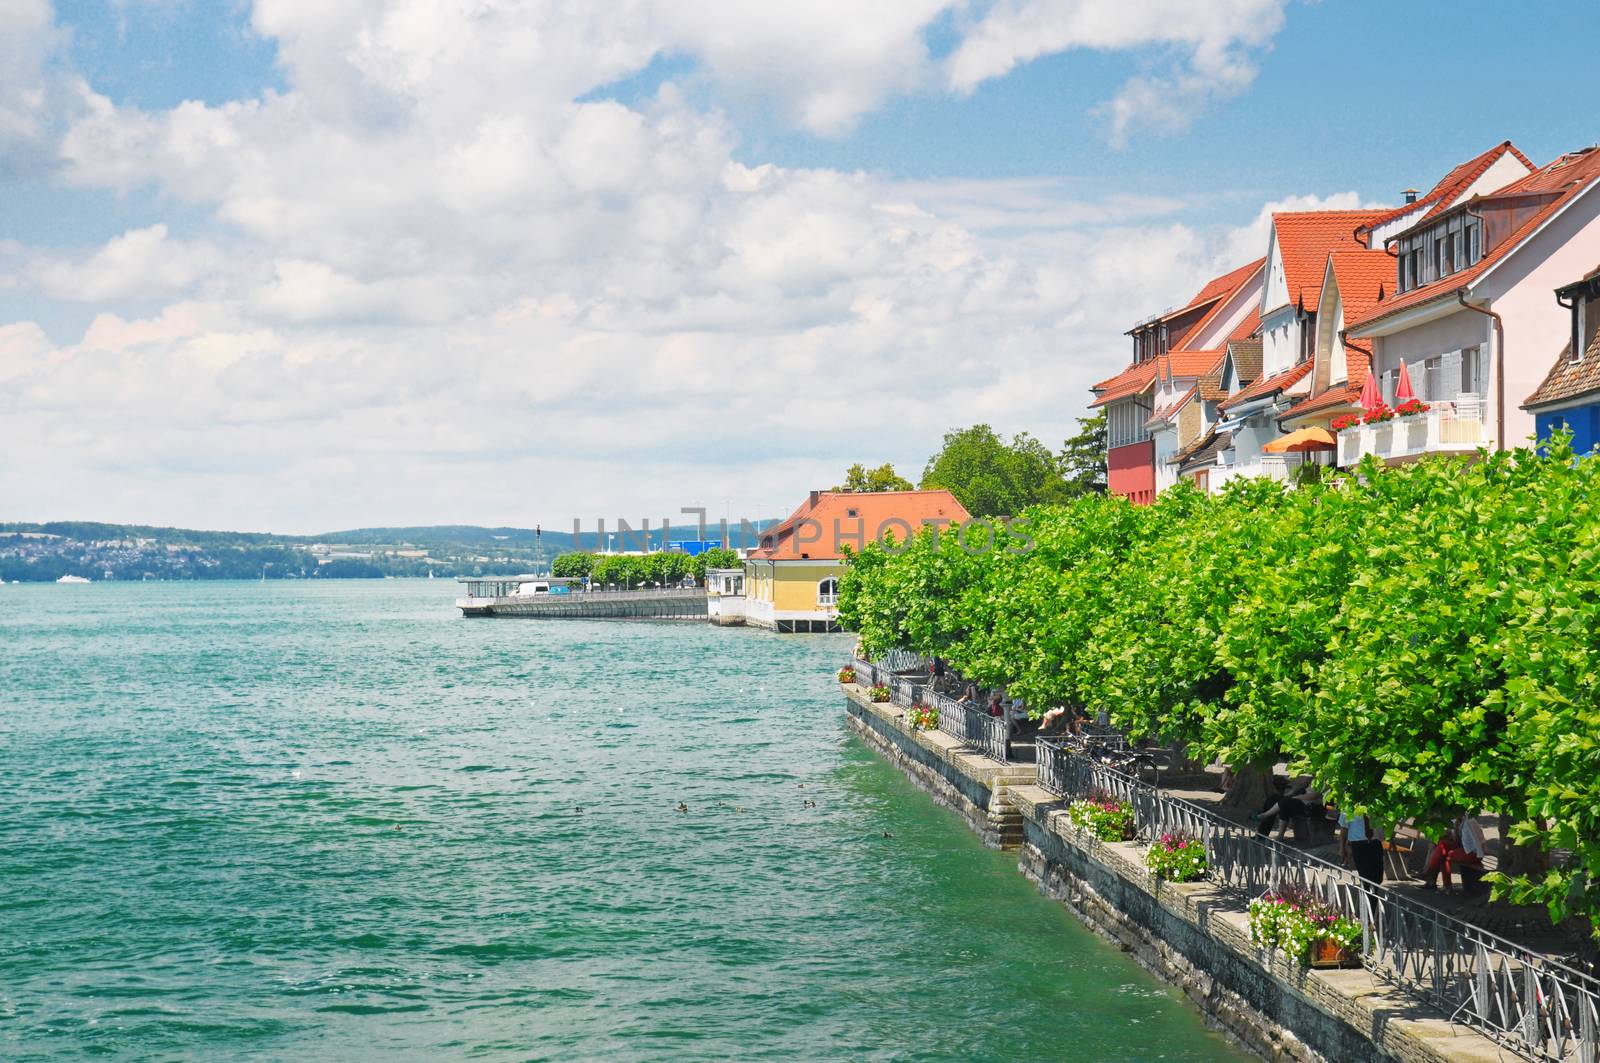 scenic waterfront of Lake Constance, Germany